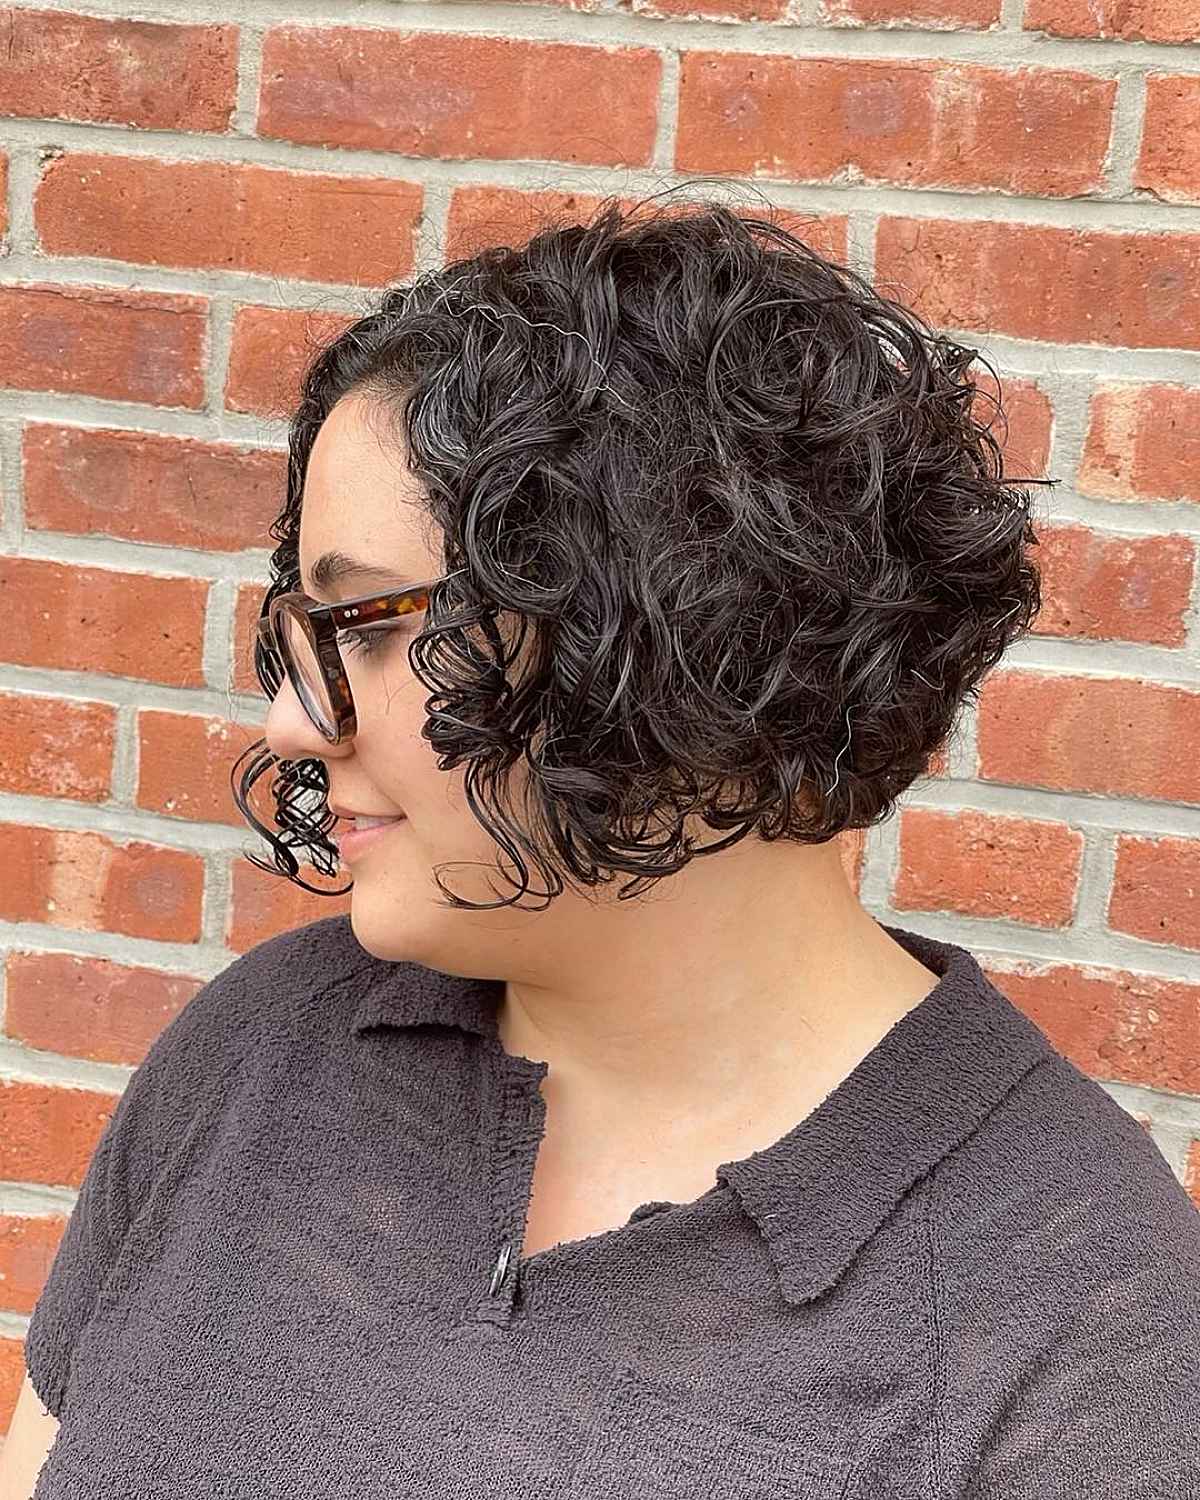 15 Stacked, Short Curly Bob Haircuts to Enhance Your Natural Curls